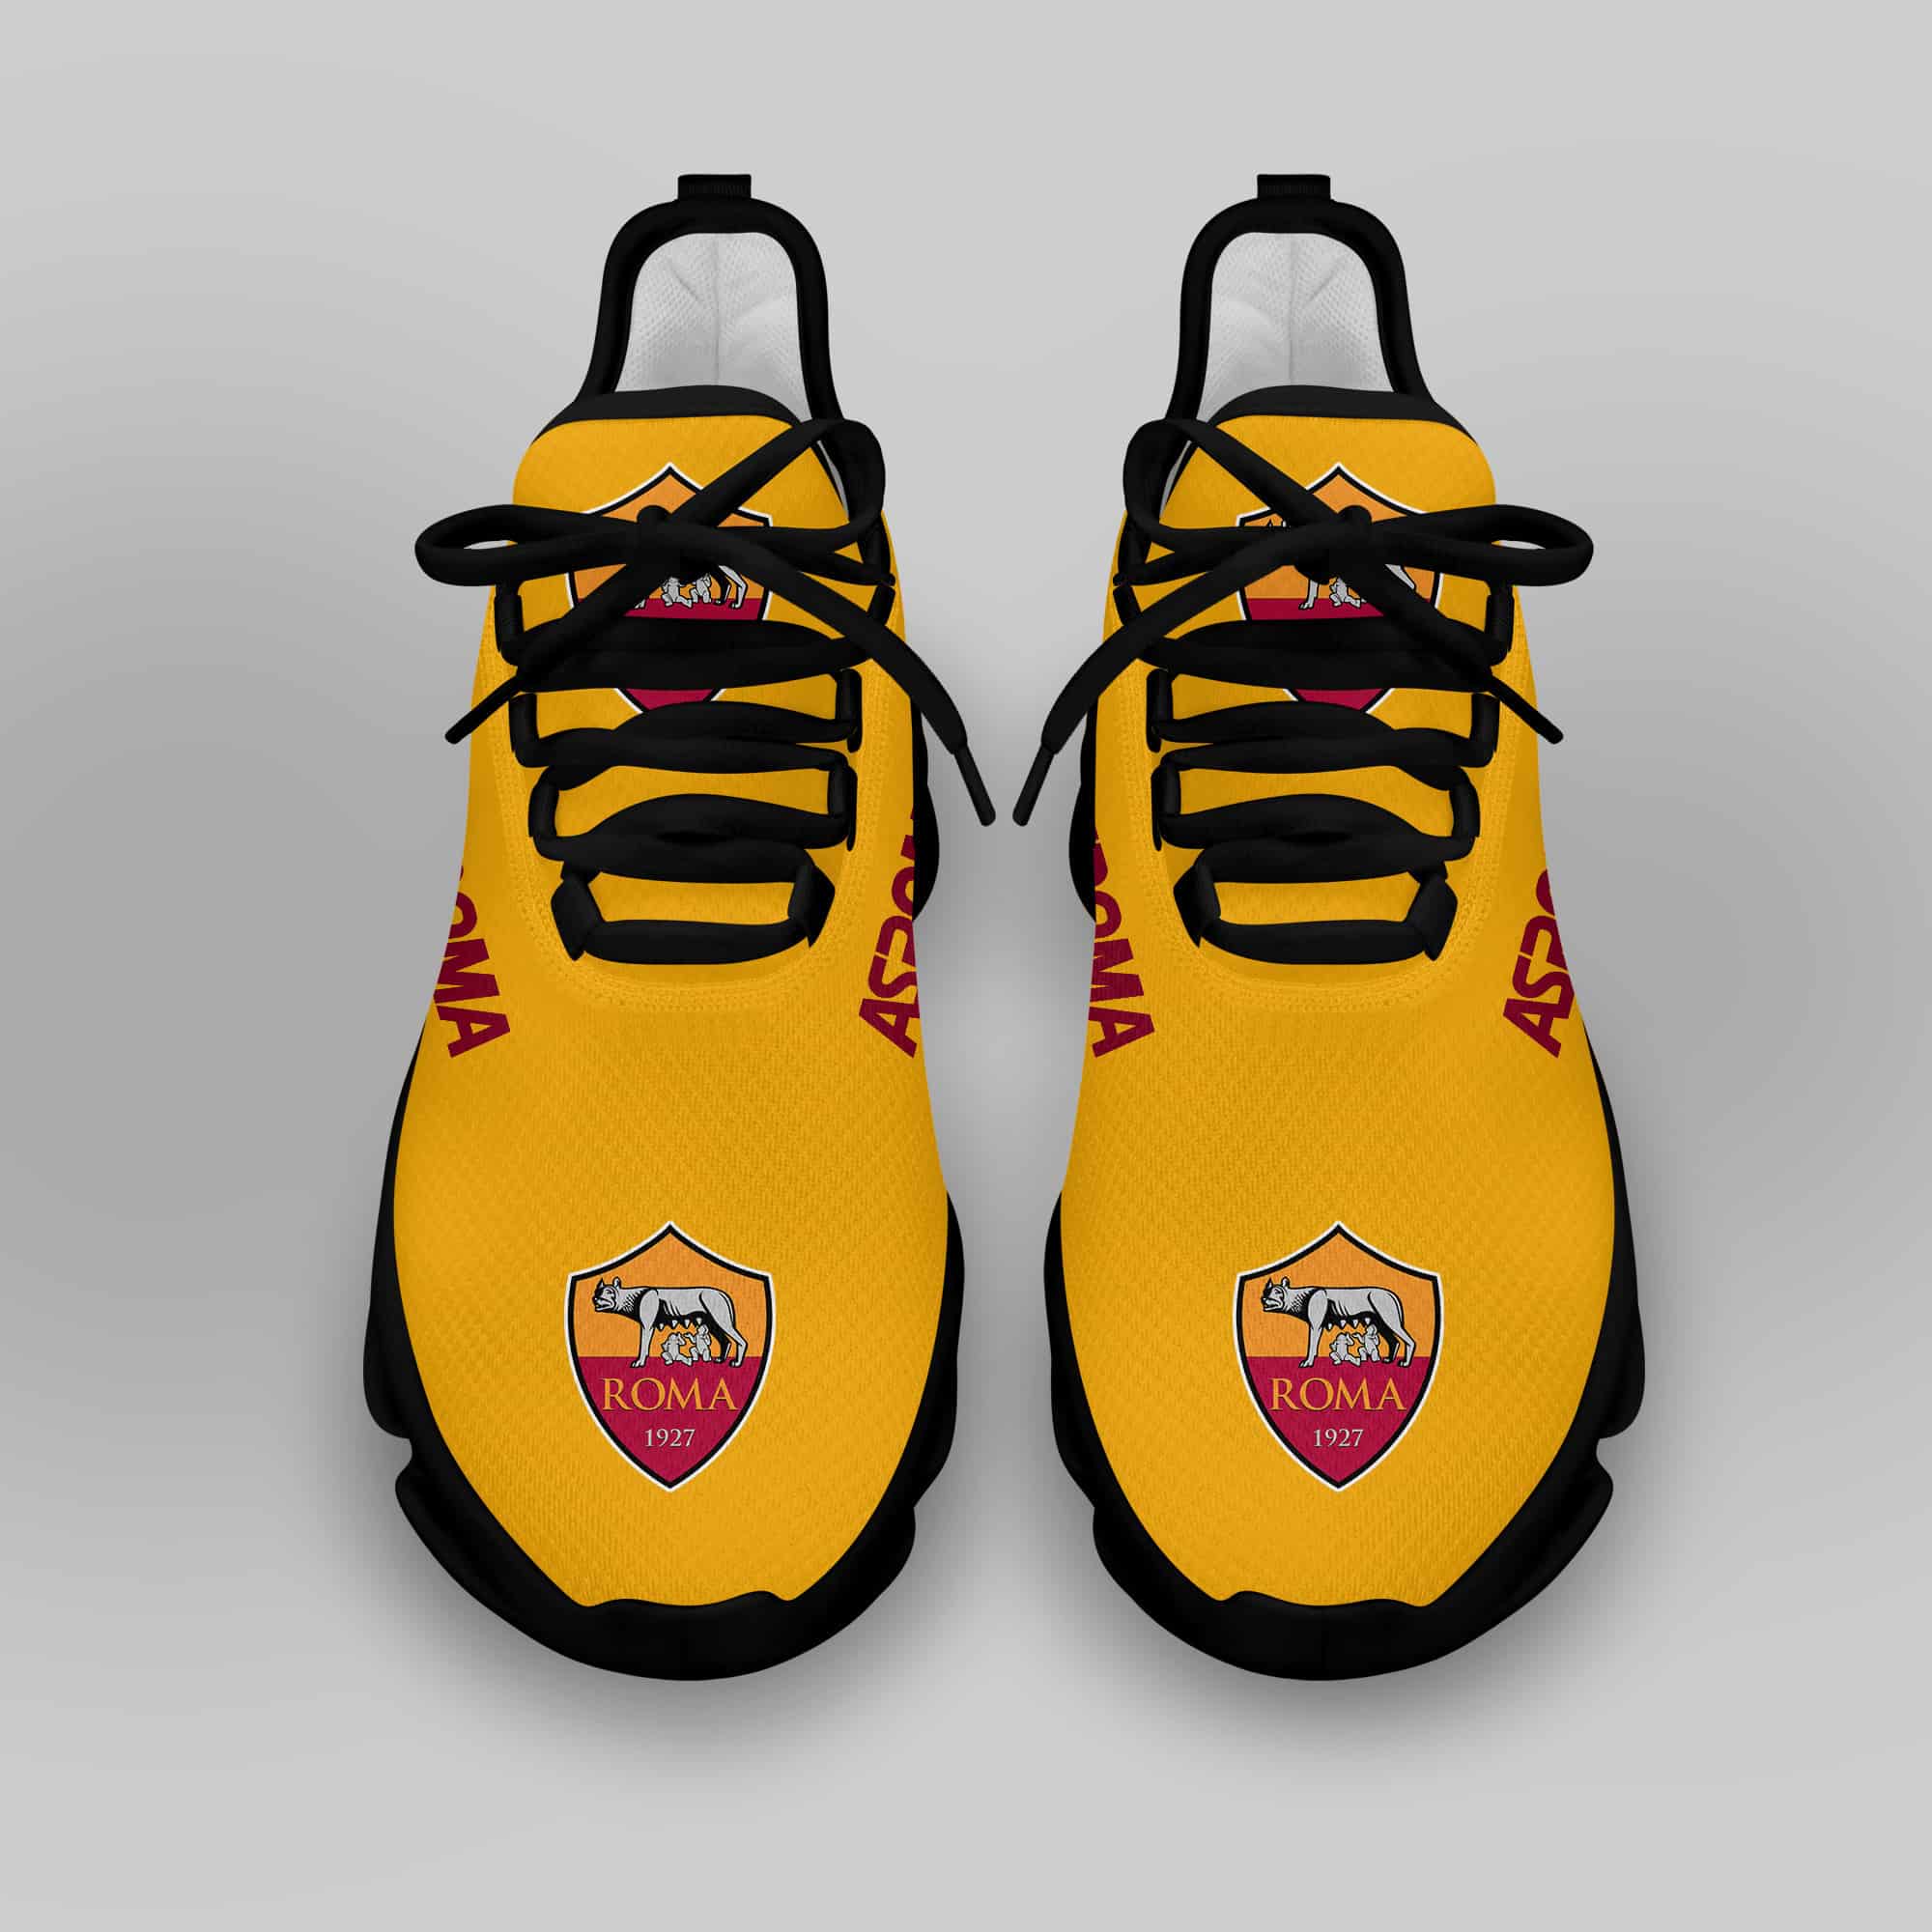 As Roma Running Shoes Max Soul Shoes Sneakers Ver 13 4